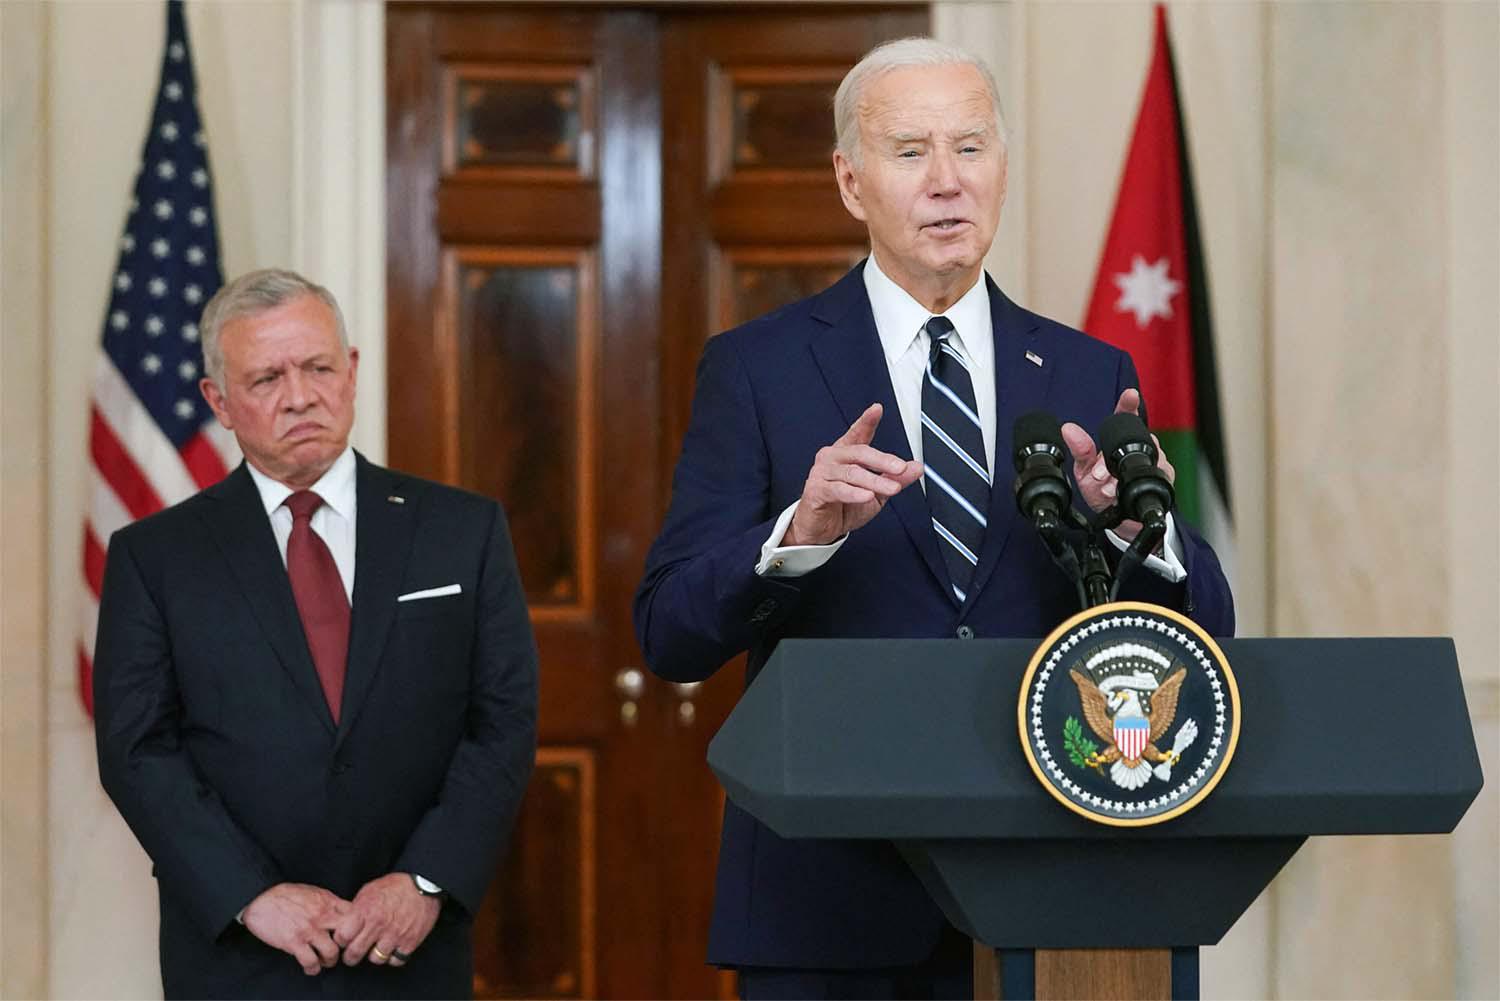 Biden said a six-week break in hostilities would provide a foundation to build something more enduring